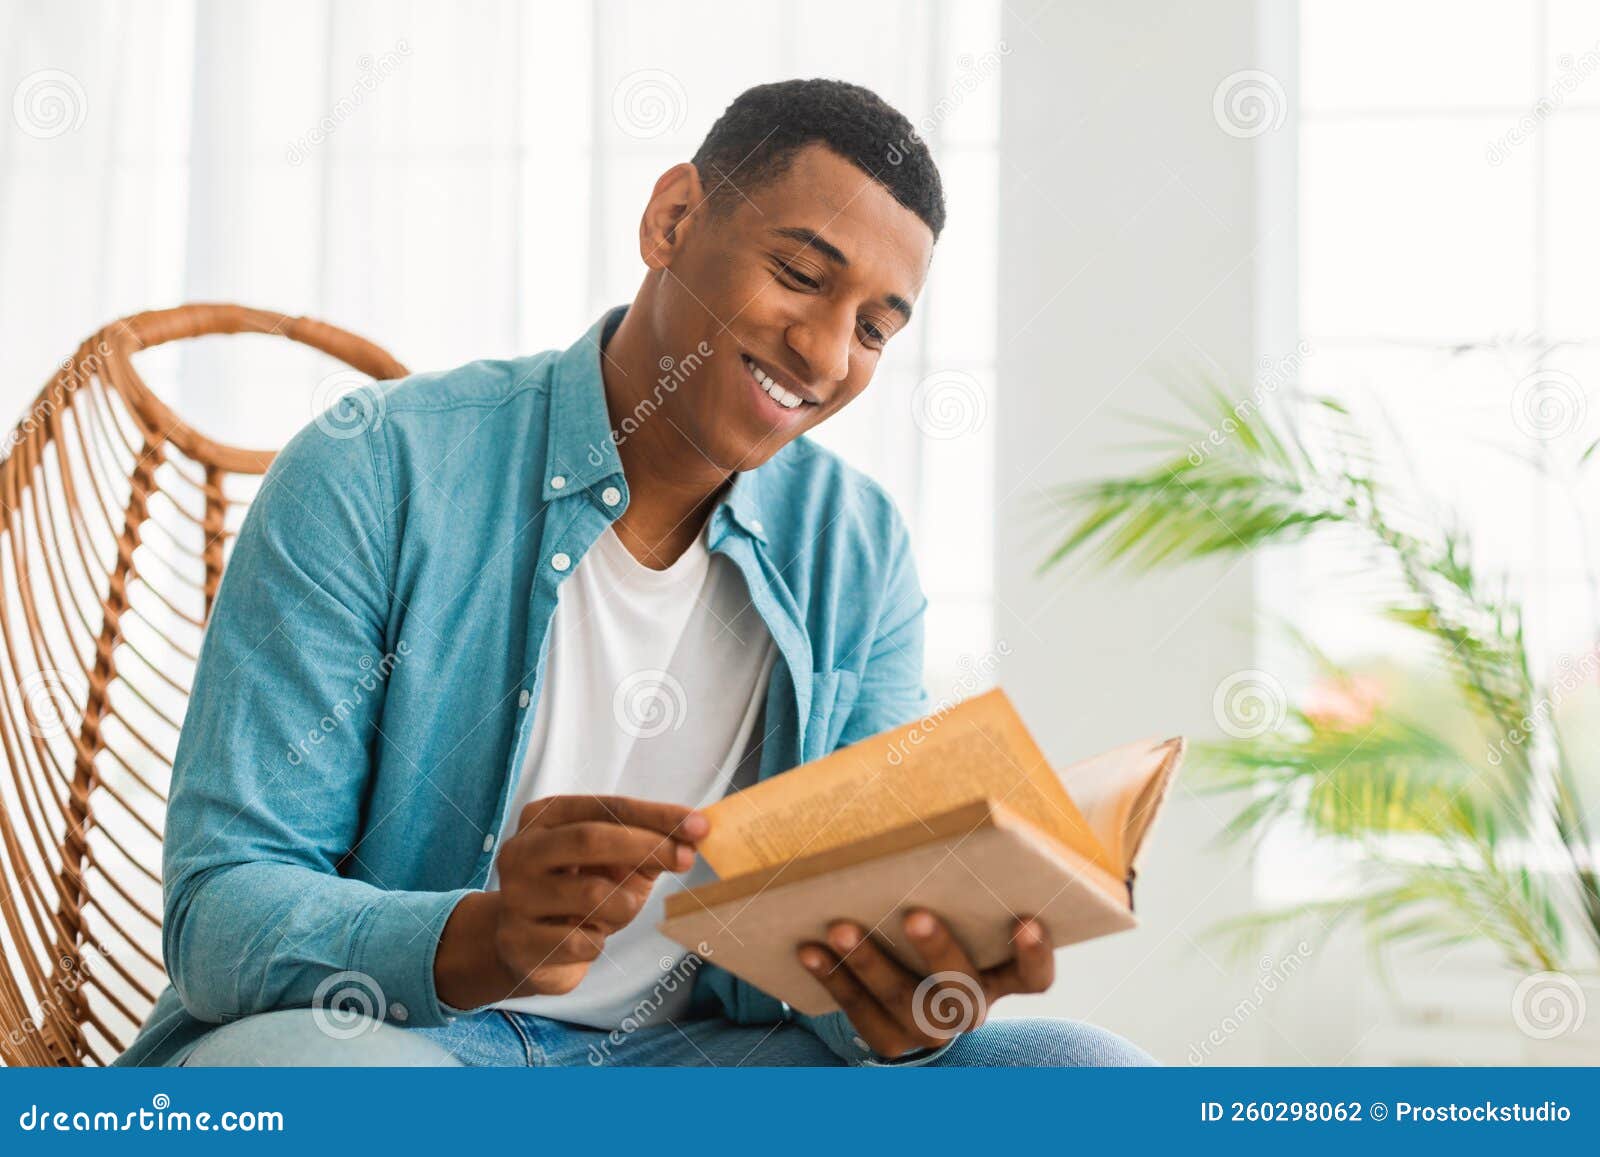 smiling smart millennial african american guy reading book, sit on chair, enjoy comfort and free time